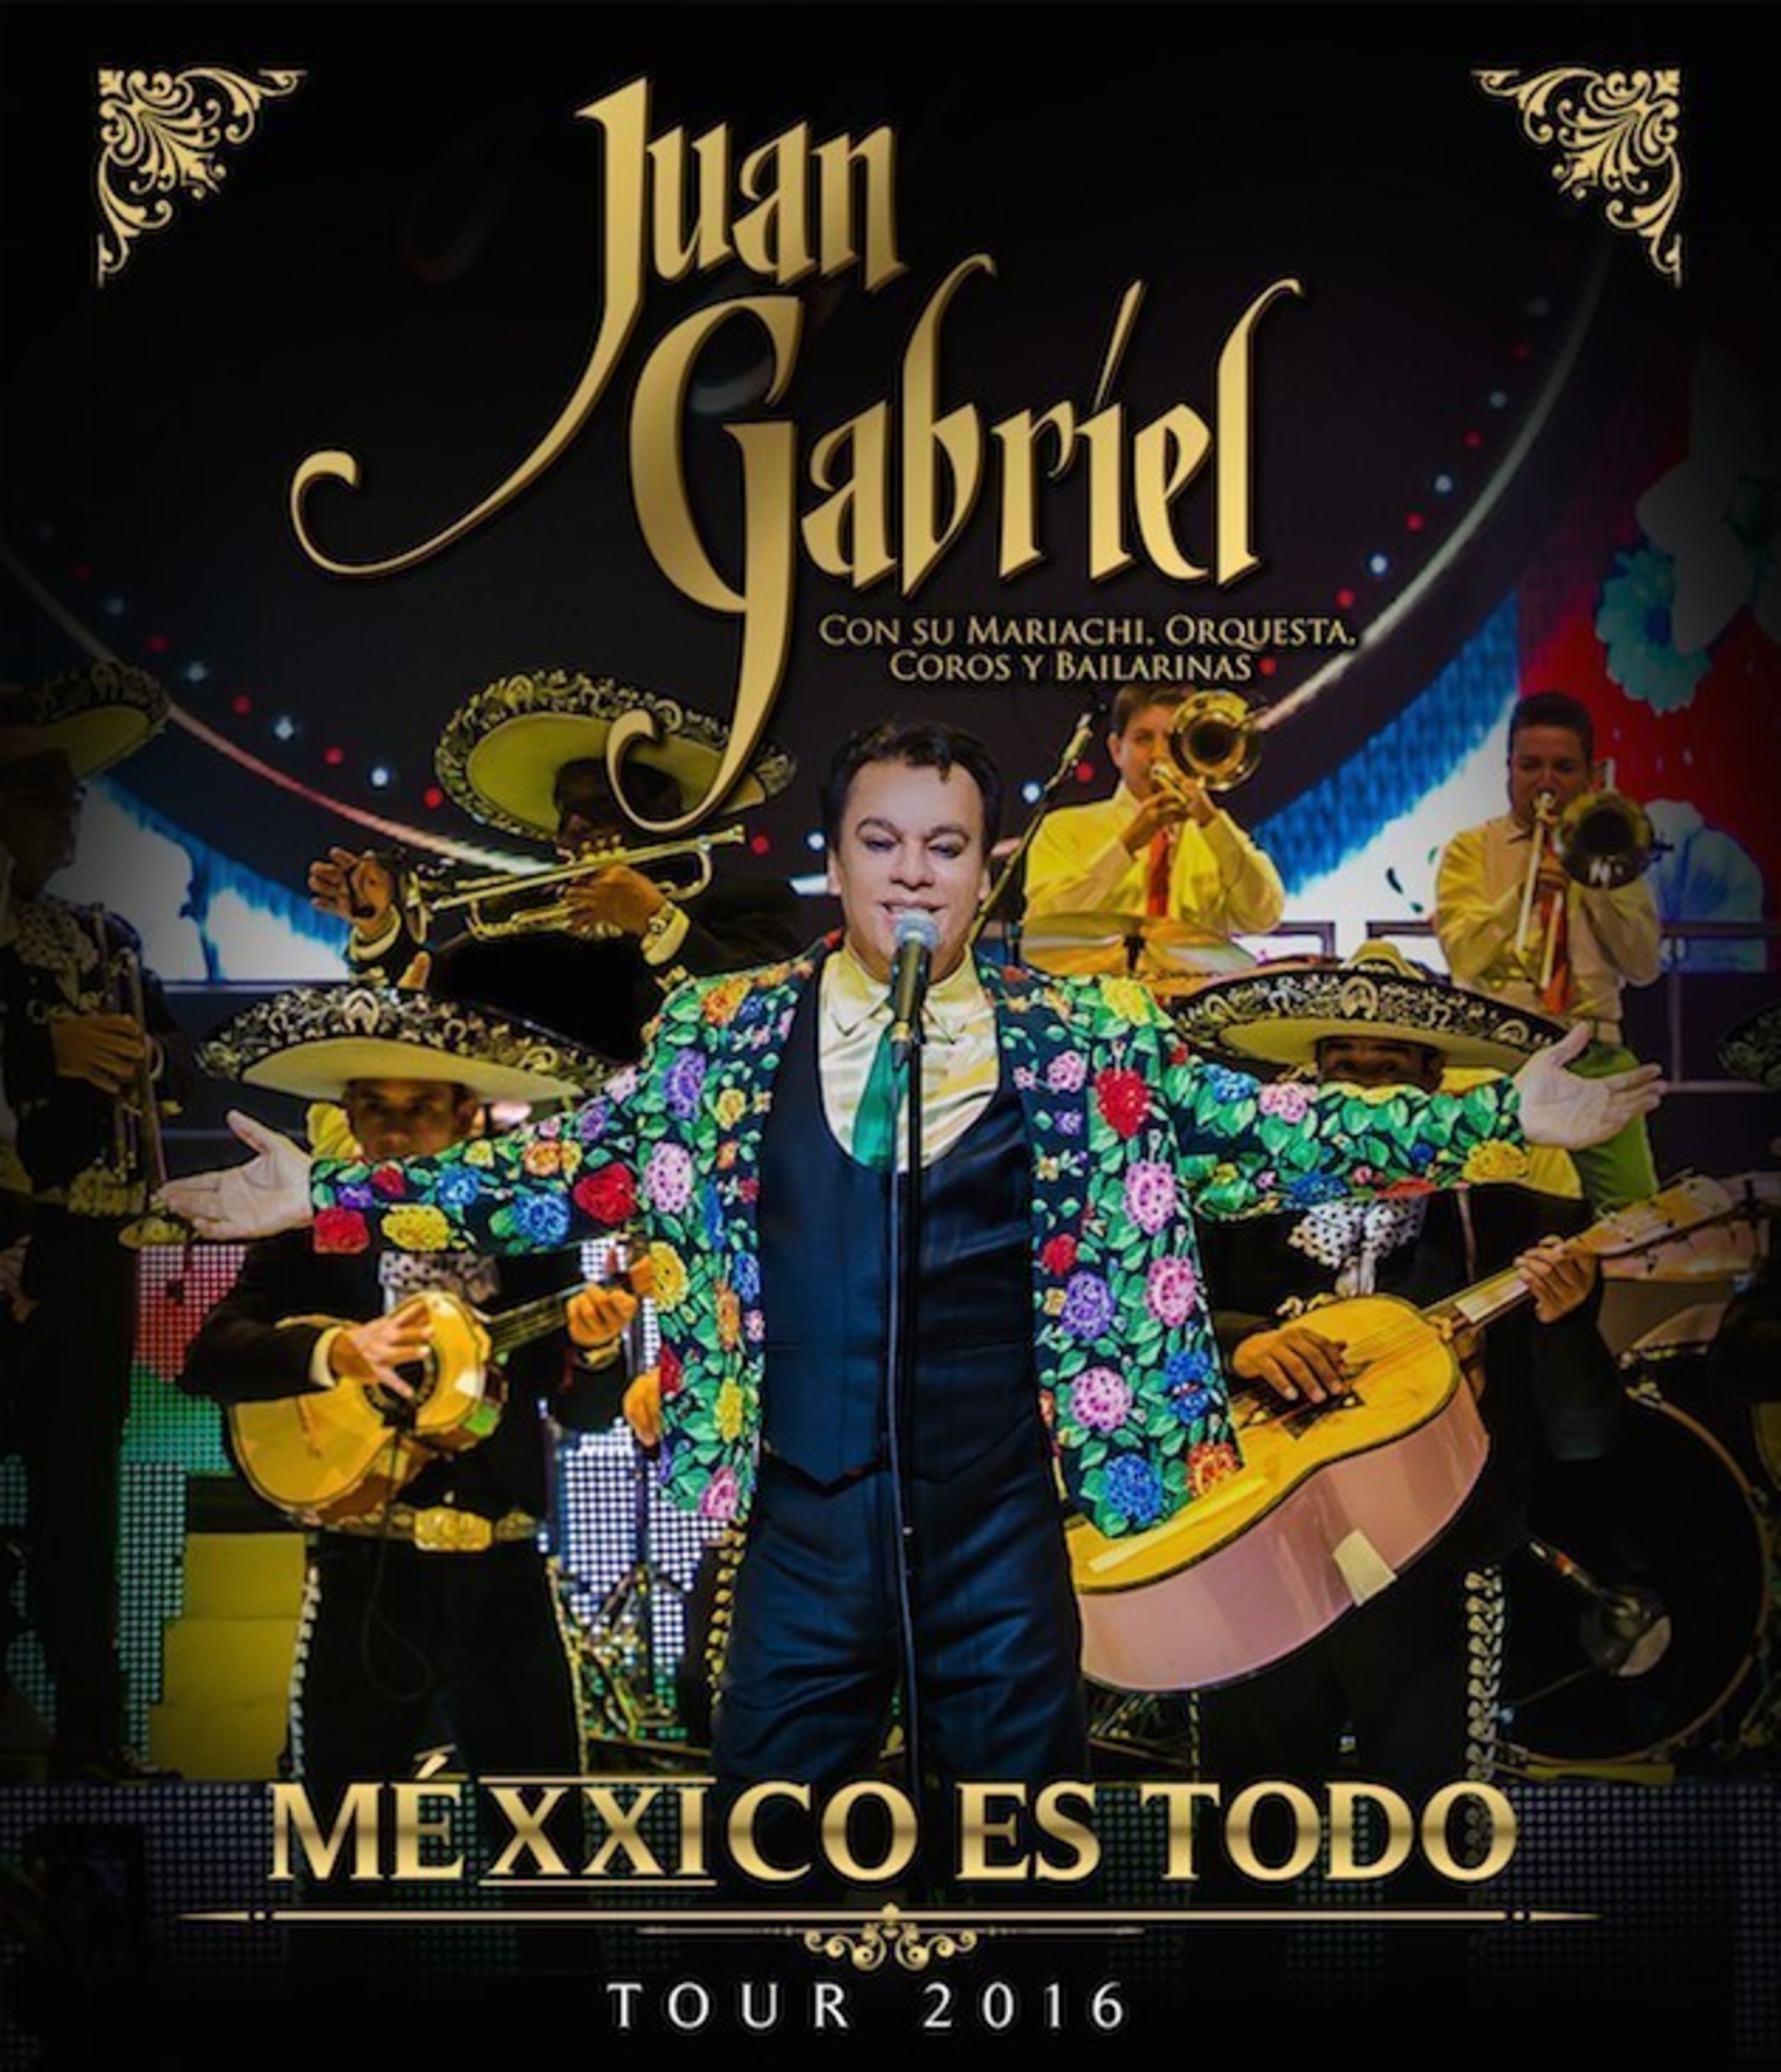 Juan Gabriel had just kicked off his SOLD OUT MeXXIco es Todo tour on August 19, played a SOLD OUT show at the forum on August 26, and passed away the next day on August 27